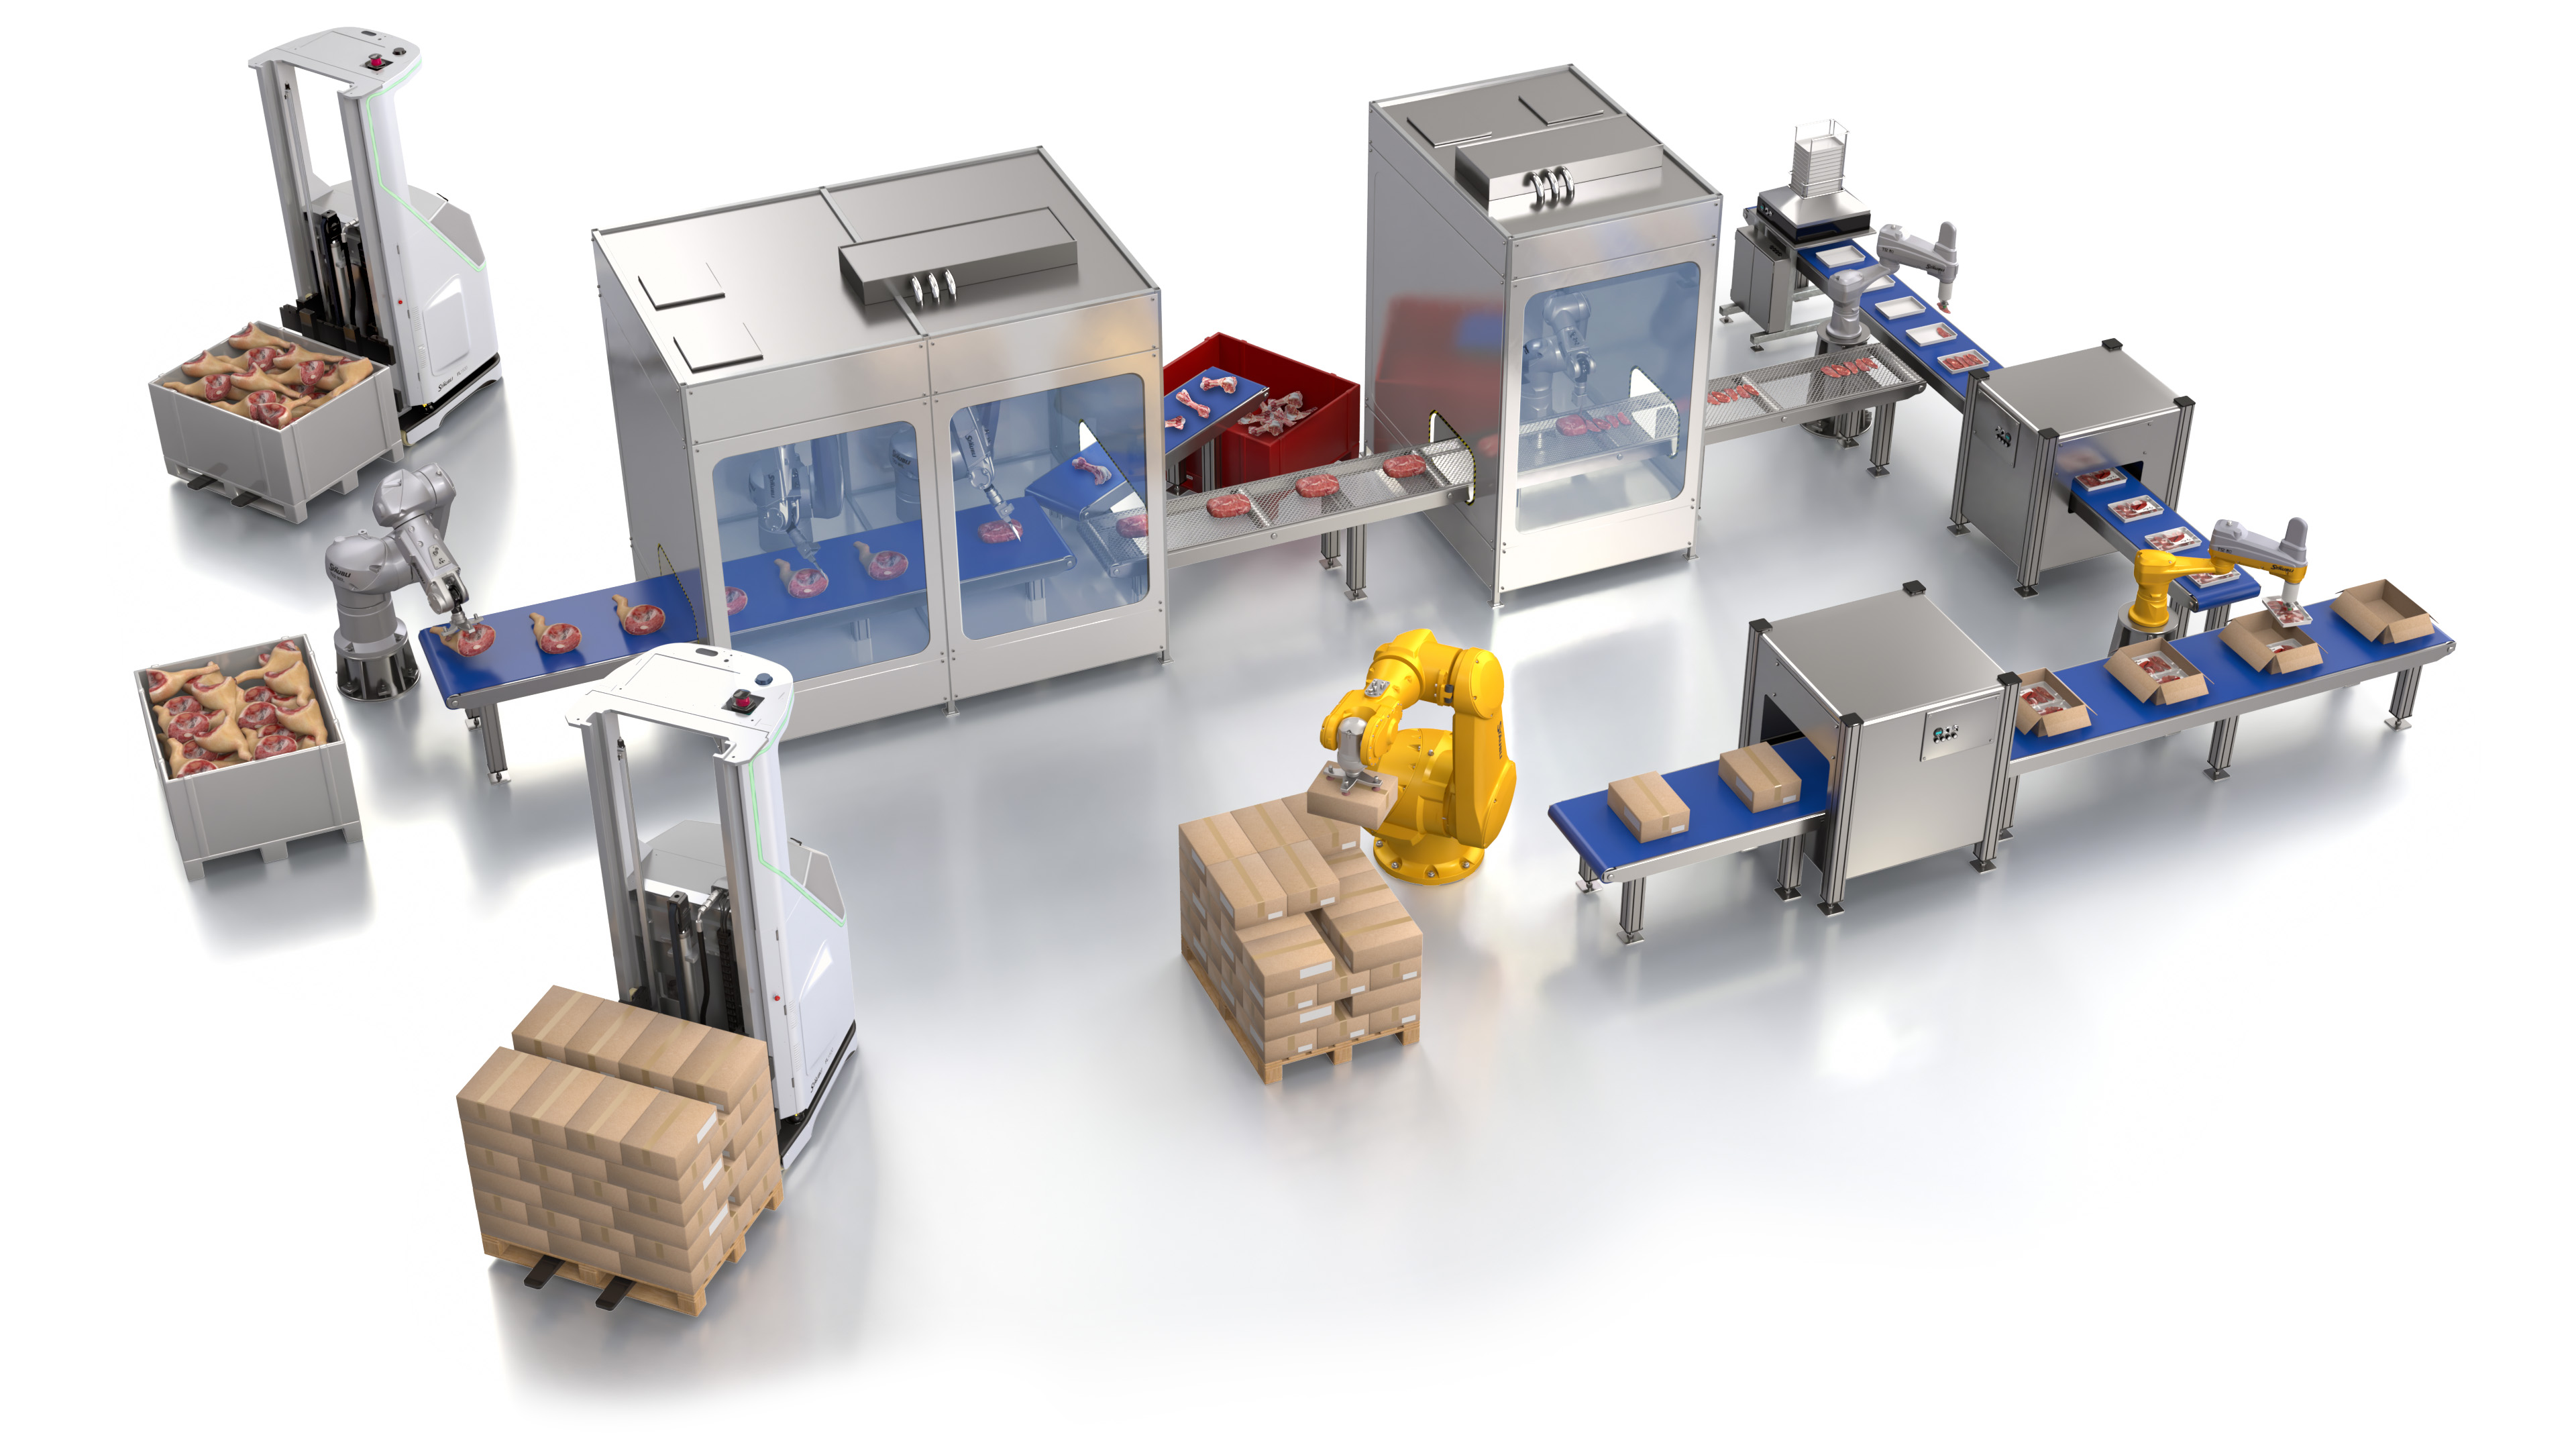 meat deboning, cutting and packaging line